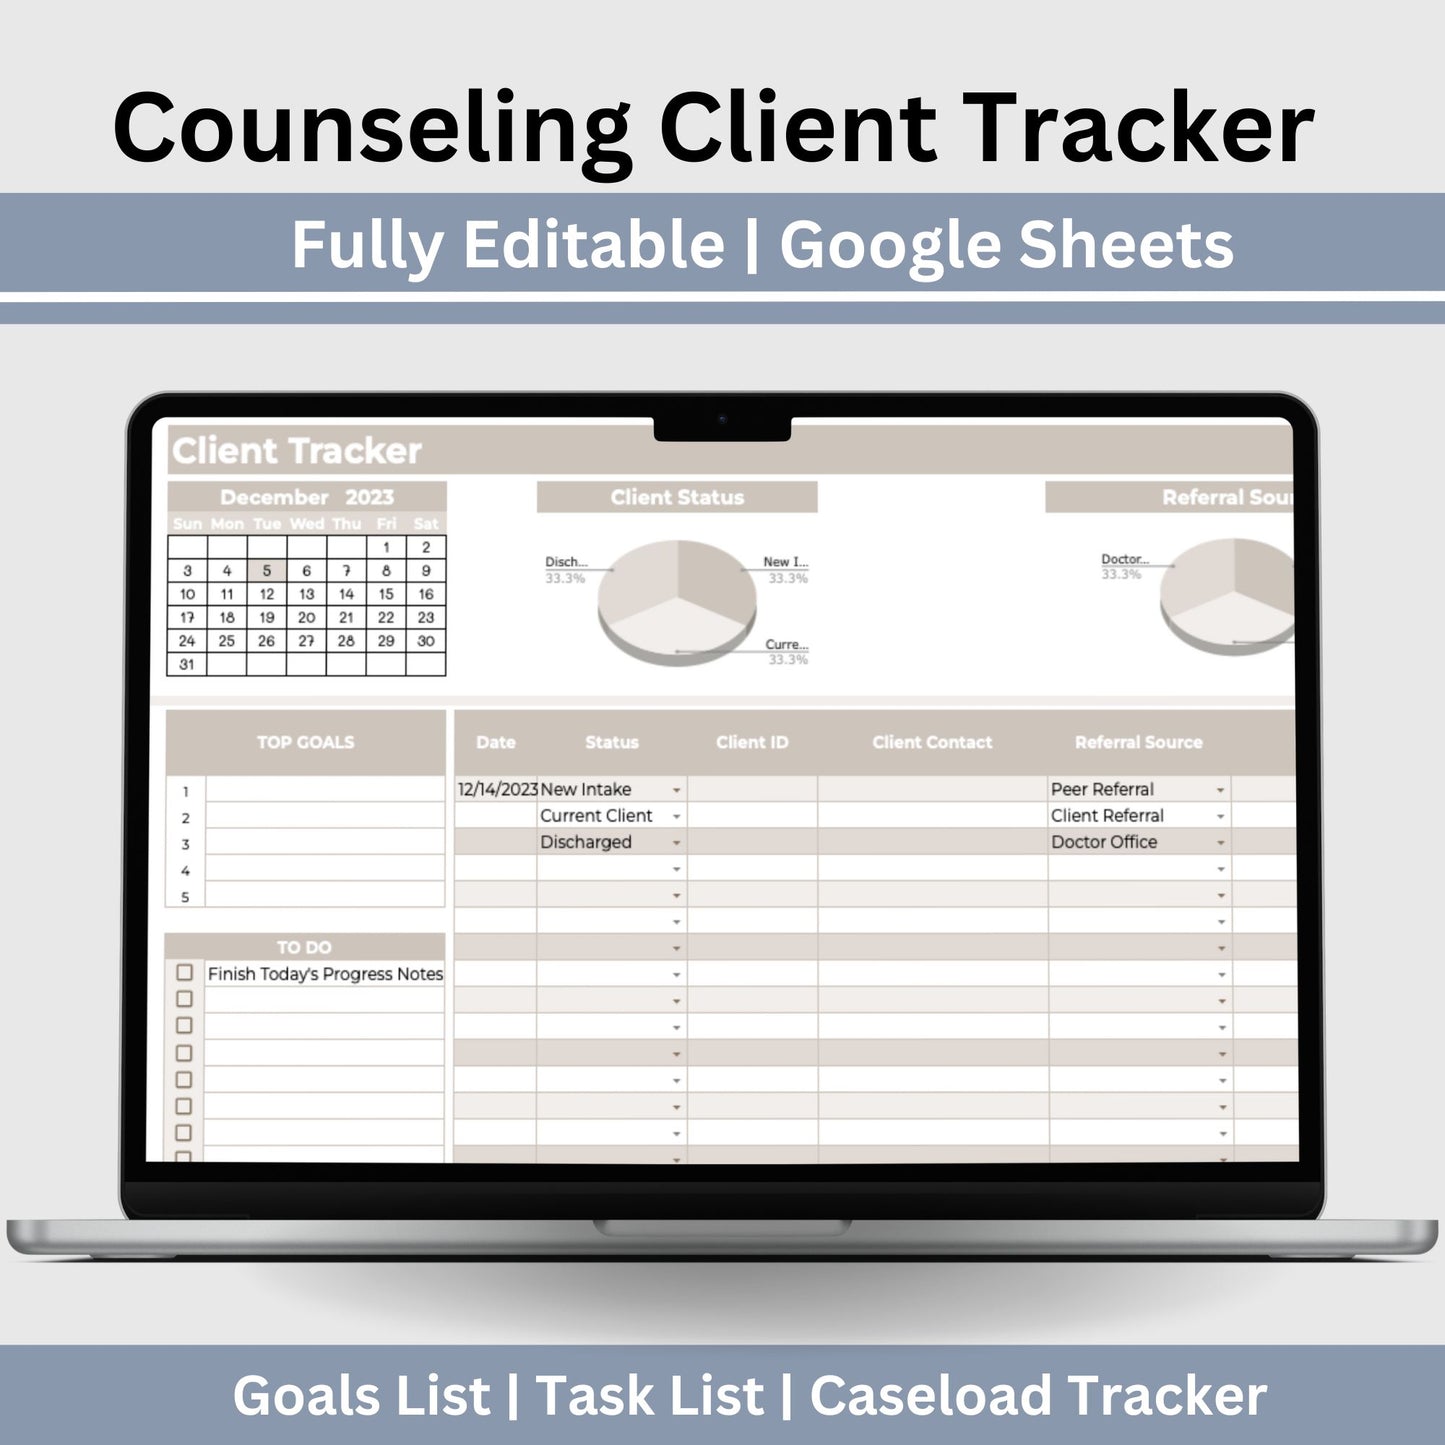 Client Tracker for Google Sheets document is tailored for mental health professionals to efficiently manage their client caseload. This client tracker is designed to streamline the workflow of therapists in private practice or counseling offices, offering a centralized platform for client session tracking and management.